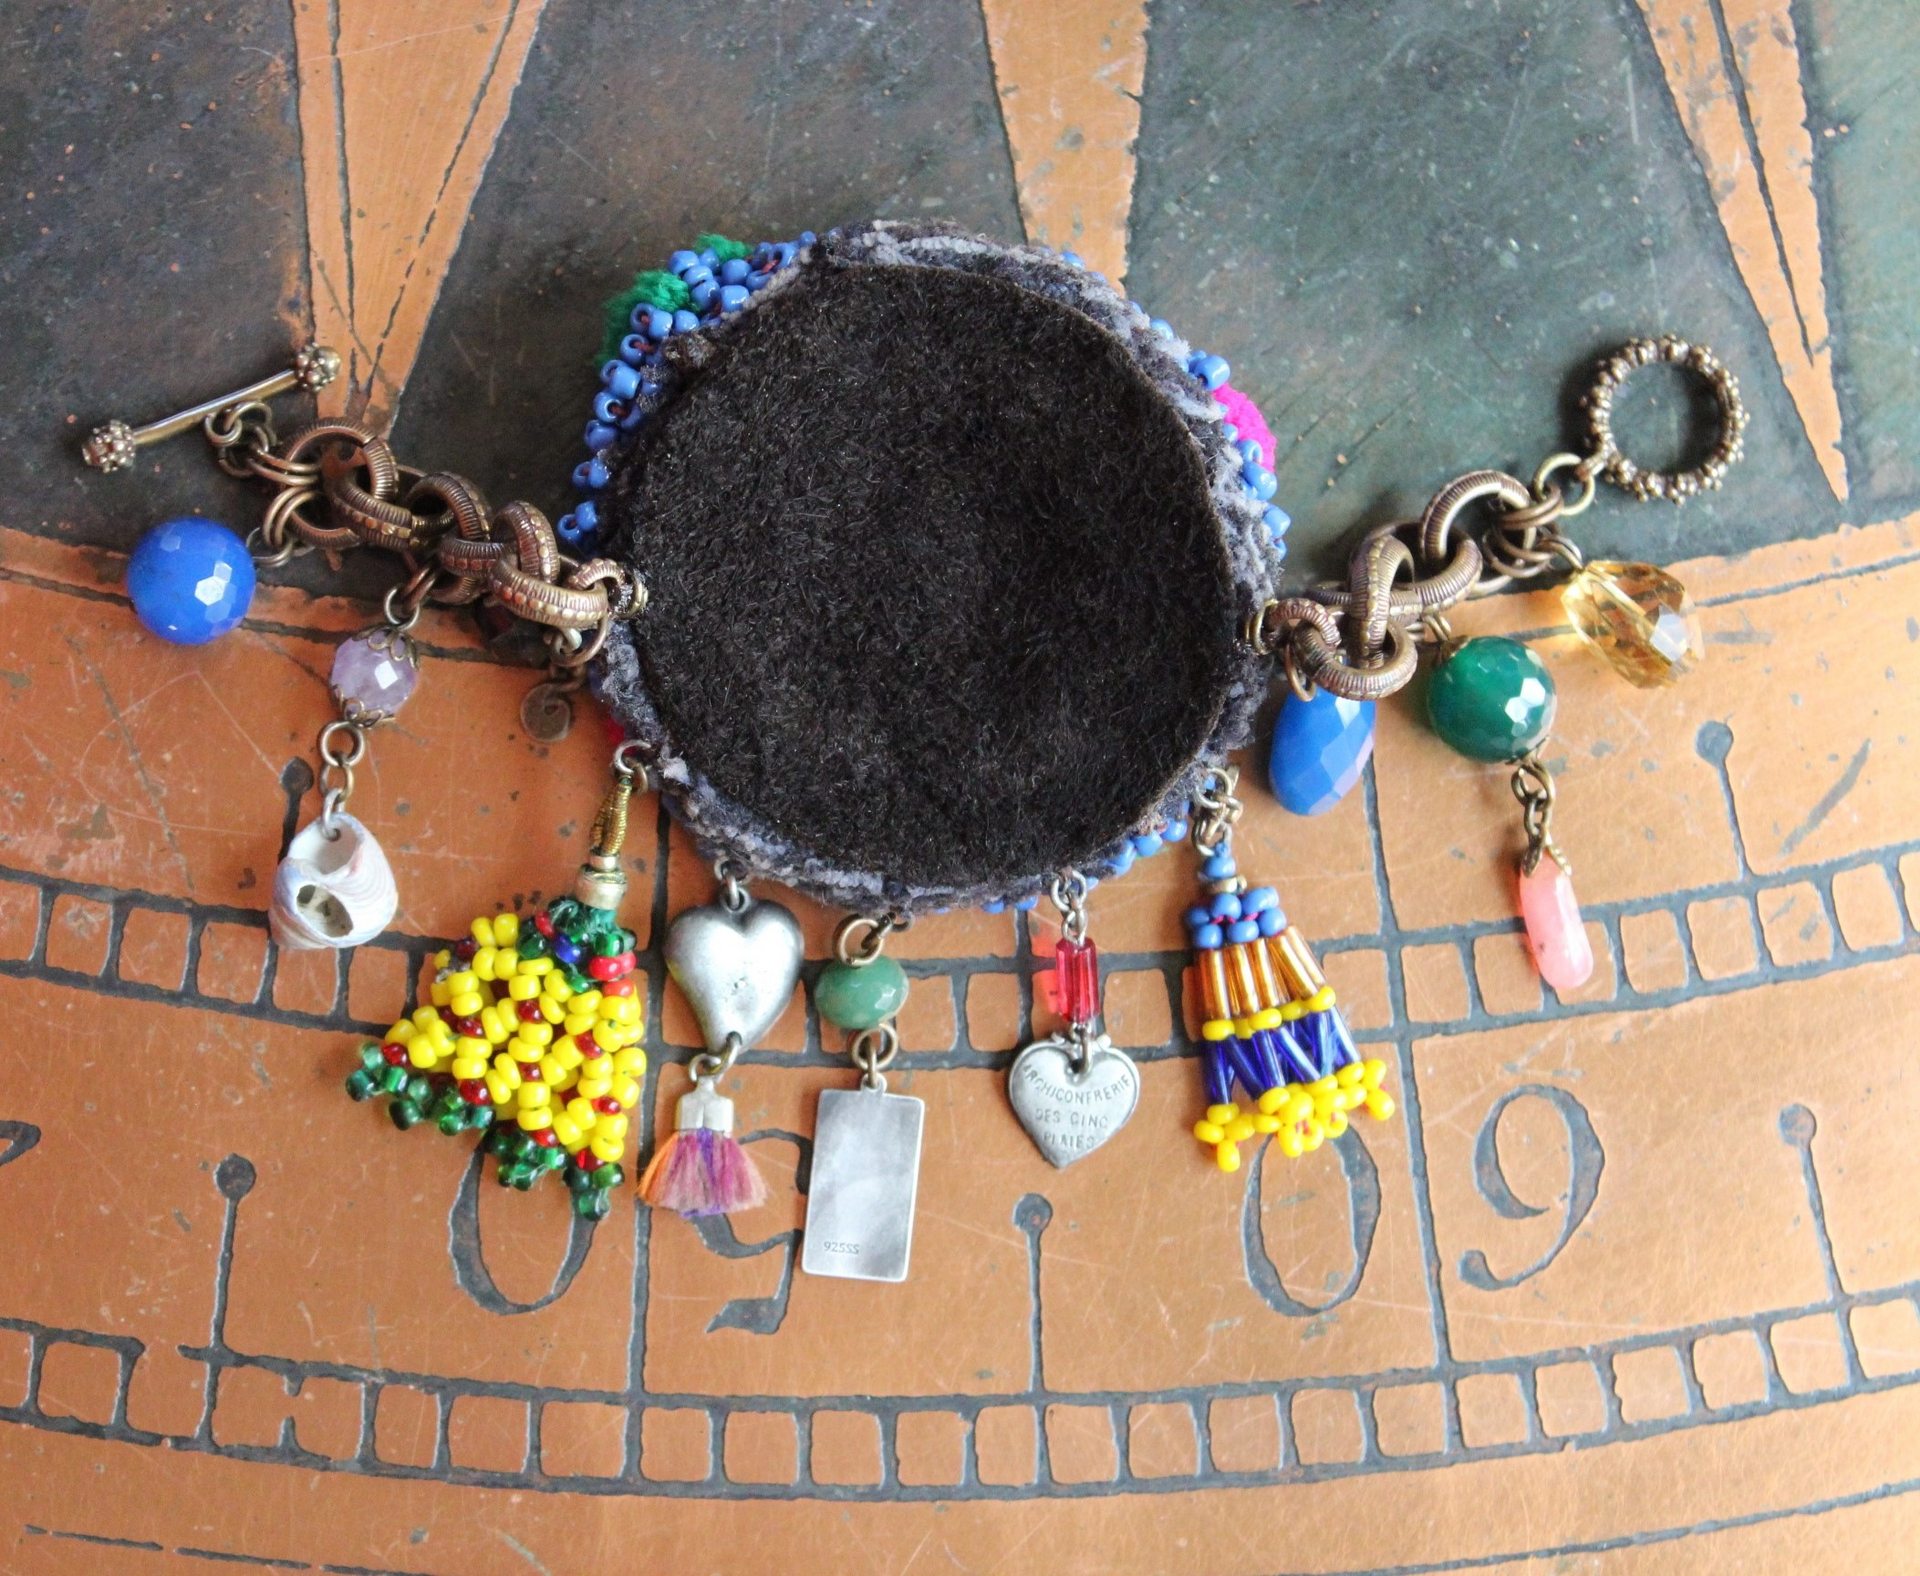 My Priestess Sisters Bracelet w/Antique Kuchi Gypsy Beaded Finding,Sterling The High Priestess Tarot Medal,Multiple Unique Dangles,Dweck Embossed Bronze Link Chain & Toggle Clasp